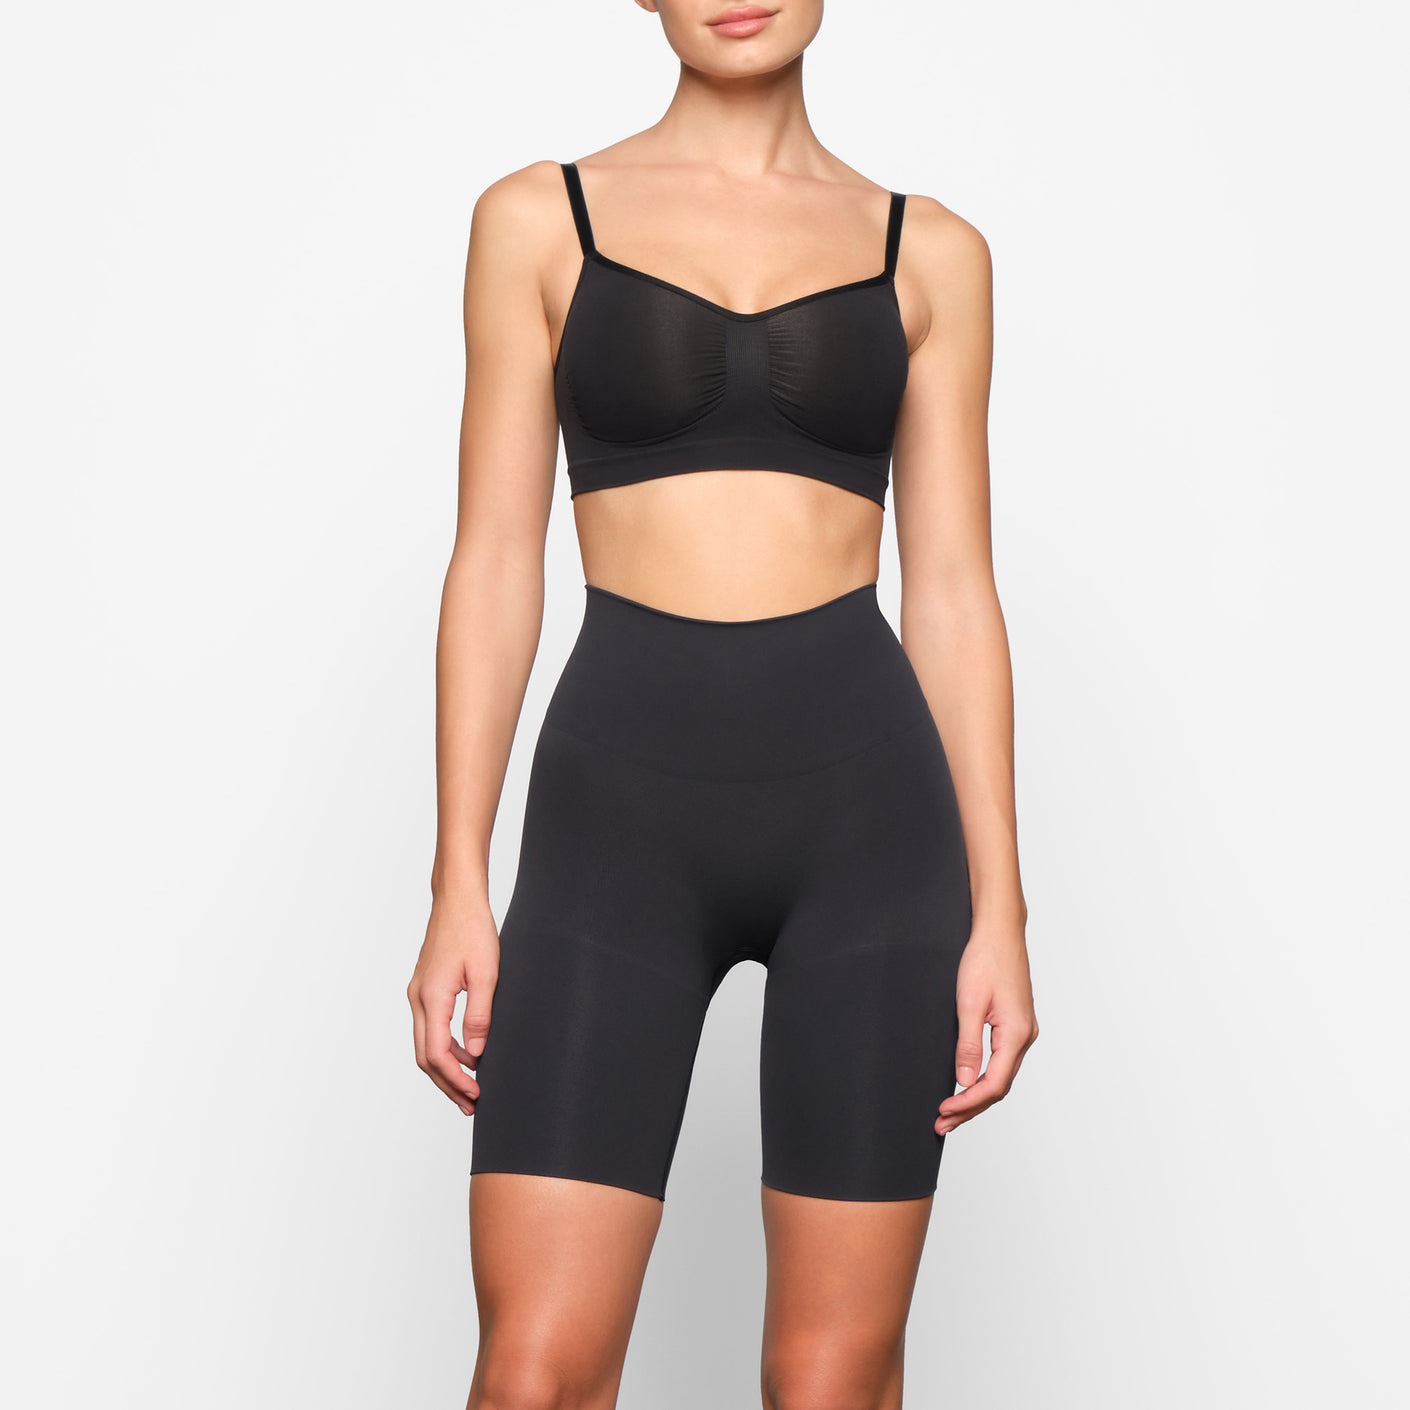 Sculpting Body Suit is the name of this BOMB Shapewear, it comes